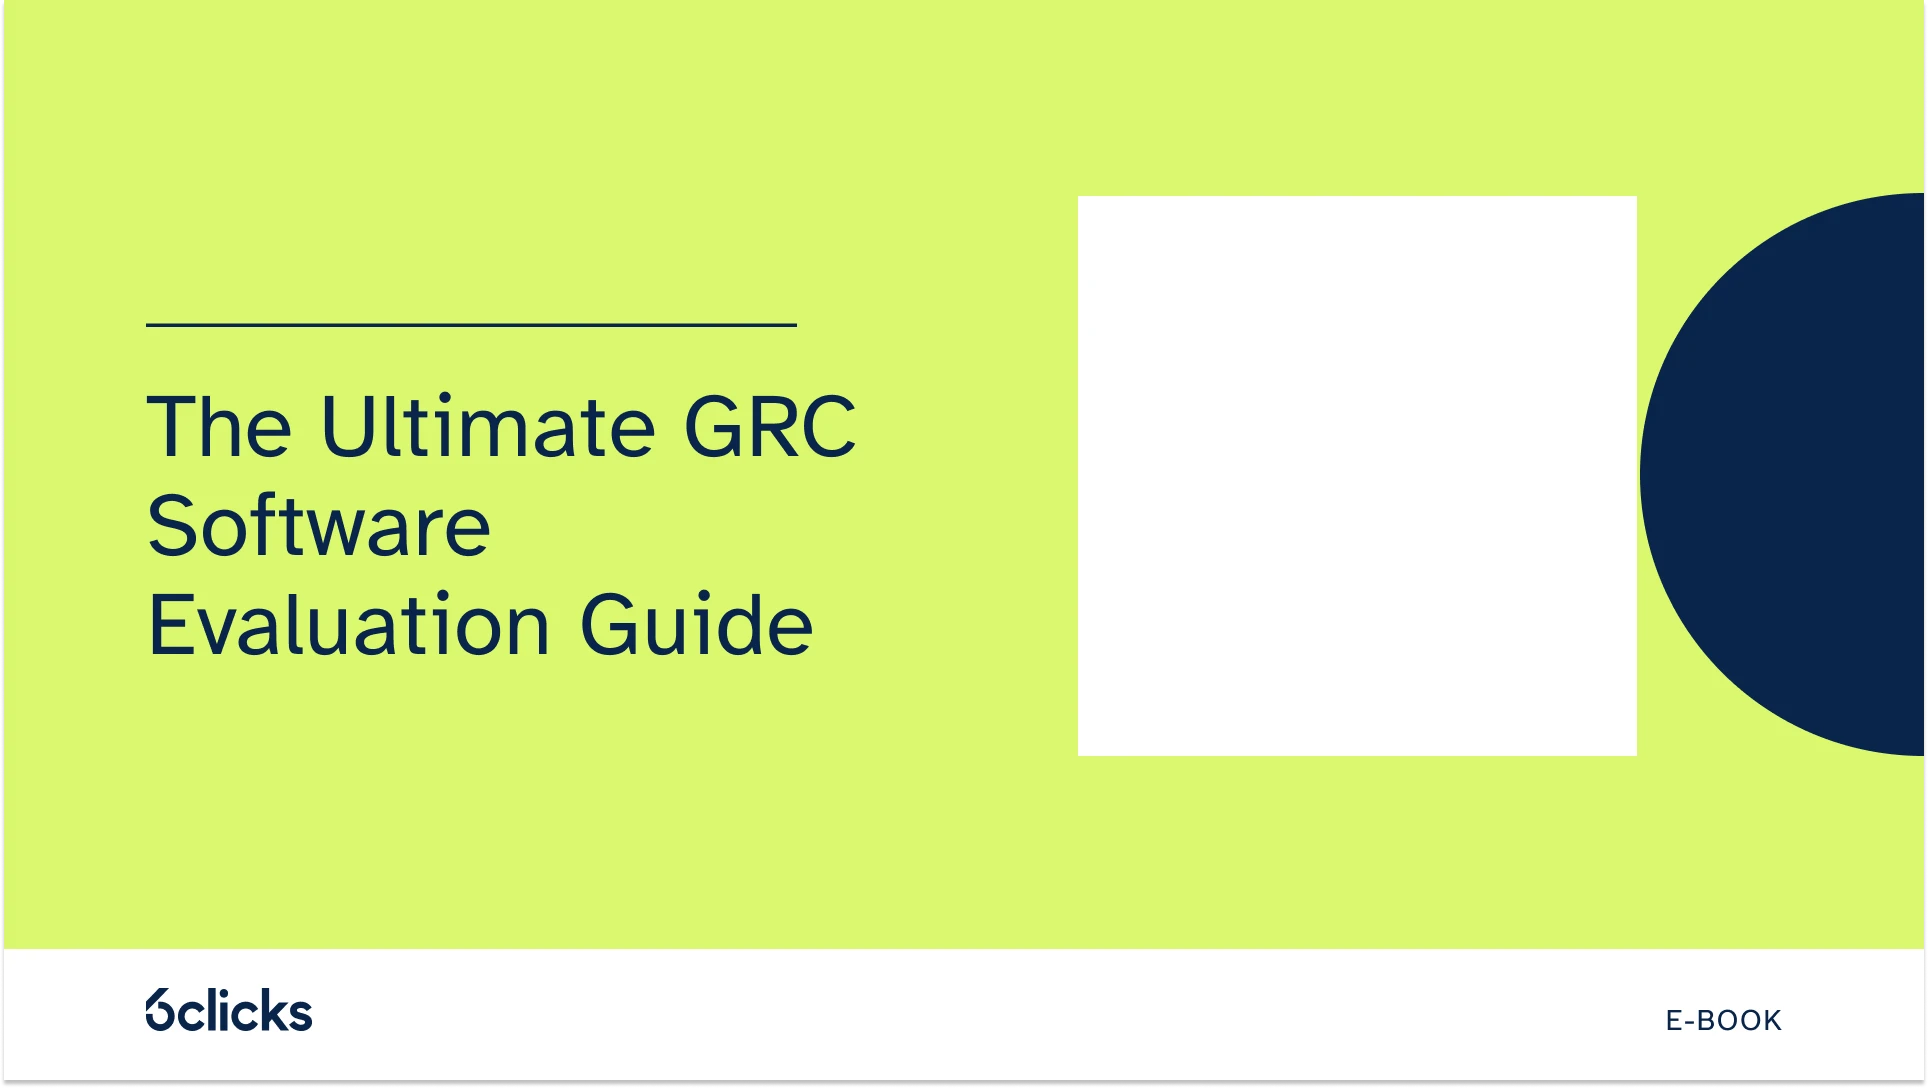 ebook_title_the_ultimate_grc_software_evaluation_guide_1x